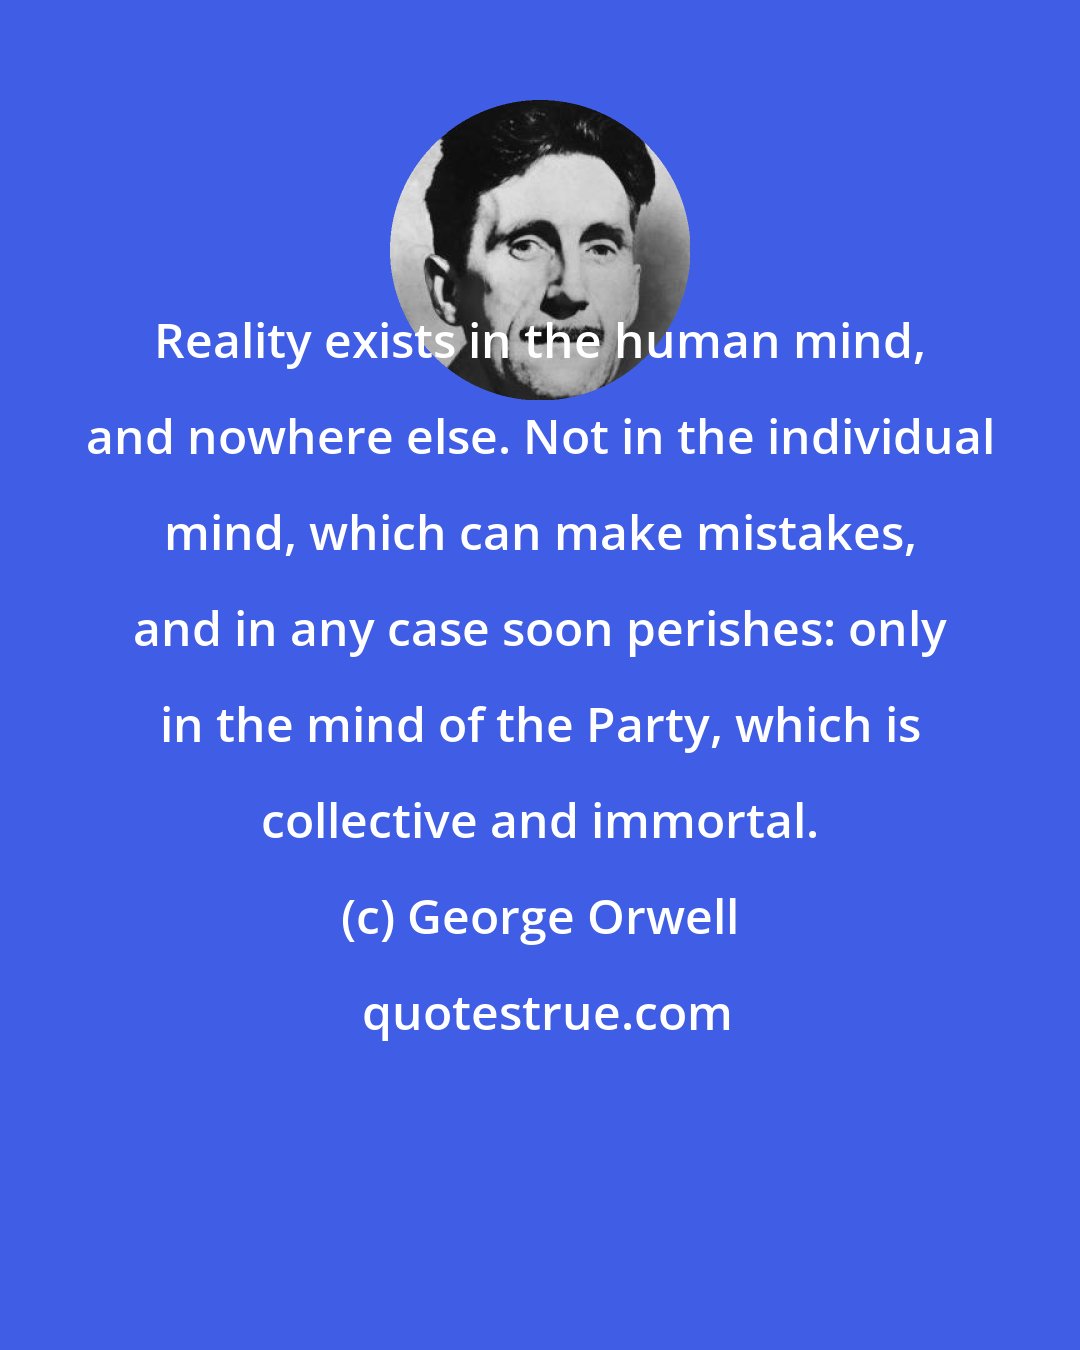 George Orwell: Reality exists in the human mind, and nowhere else. Not in the individual mind, which can make mistakes, and in any case soon perishes: only in the mind of the Party, which is collective and immortal.